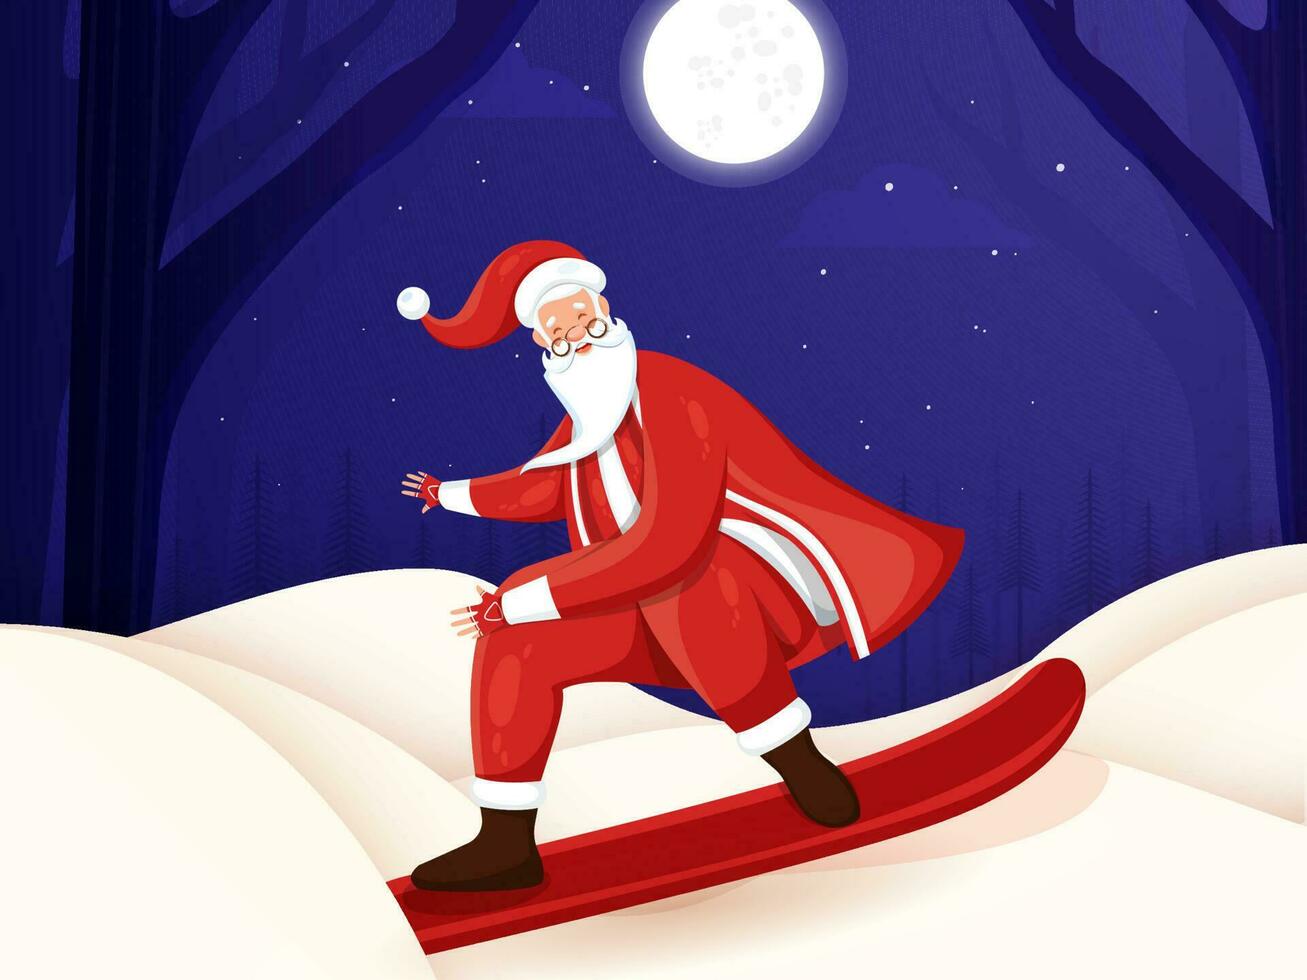 Cute Santa Skating on Winter Night Purple and White background. vector